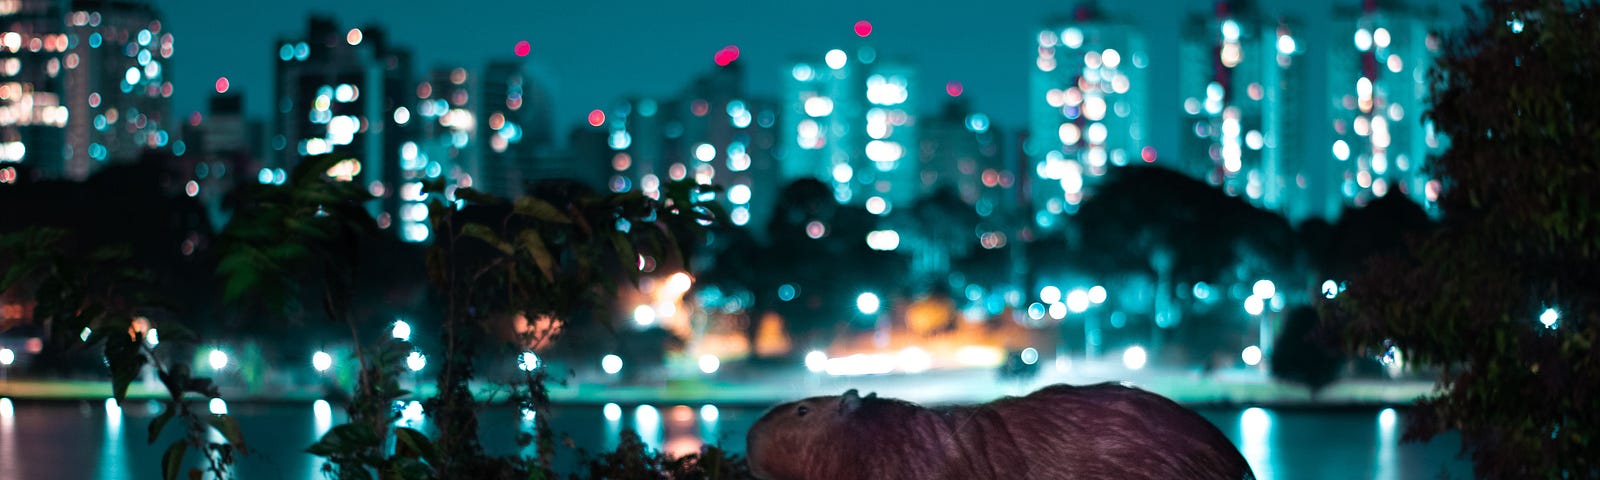 capybara in a nighttime urban setting, lit up city scape in the background